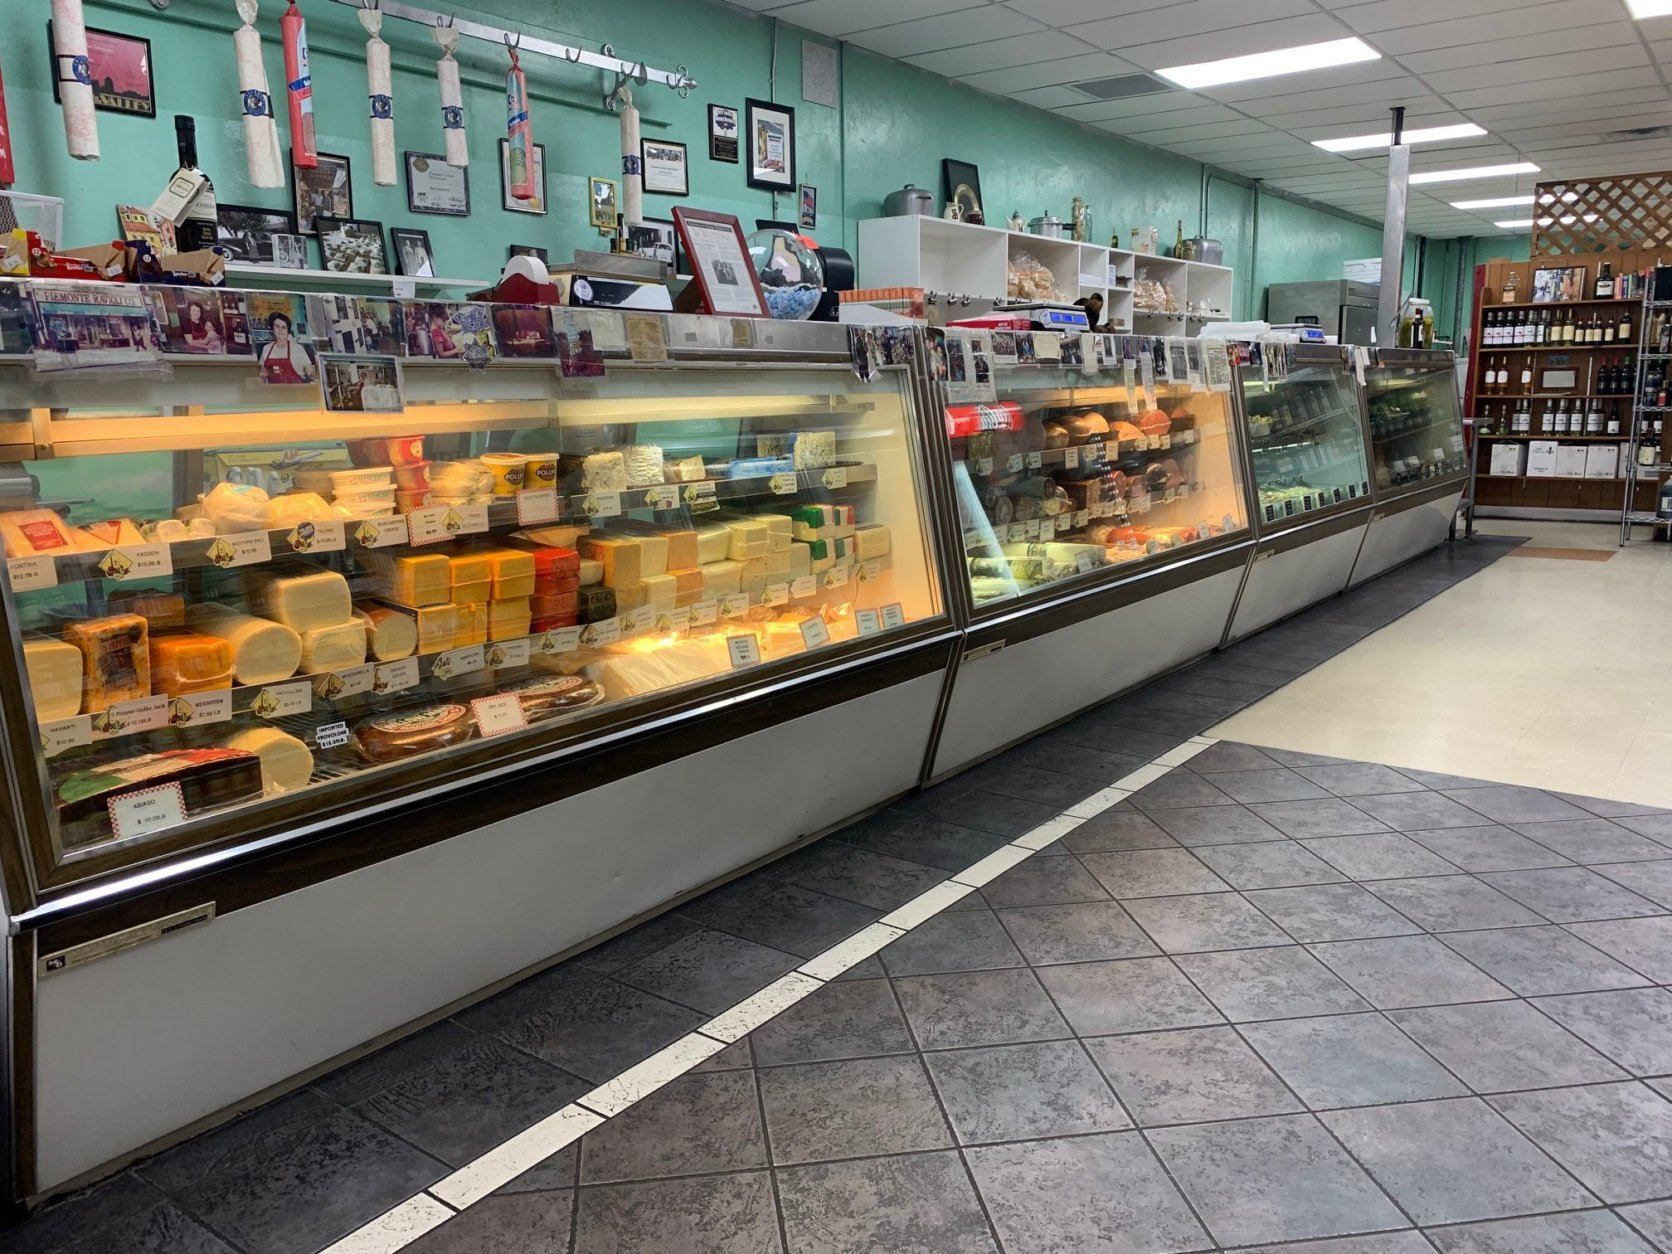 Piemonte's is an old school Italian deli and grocery in the Tower District. (WTOP/Noah Frank)